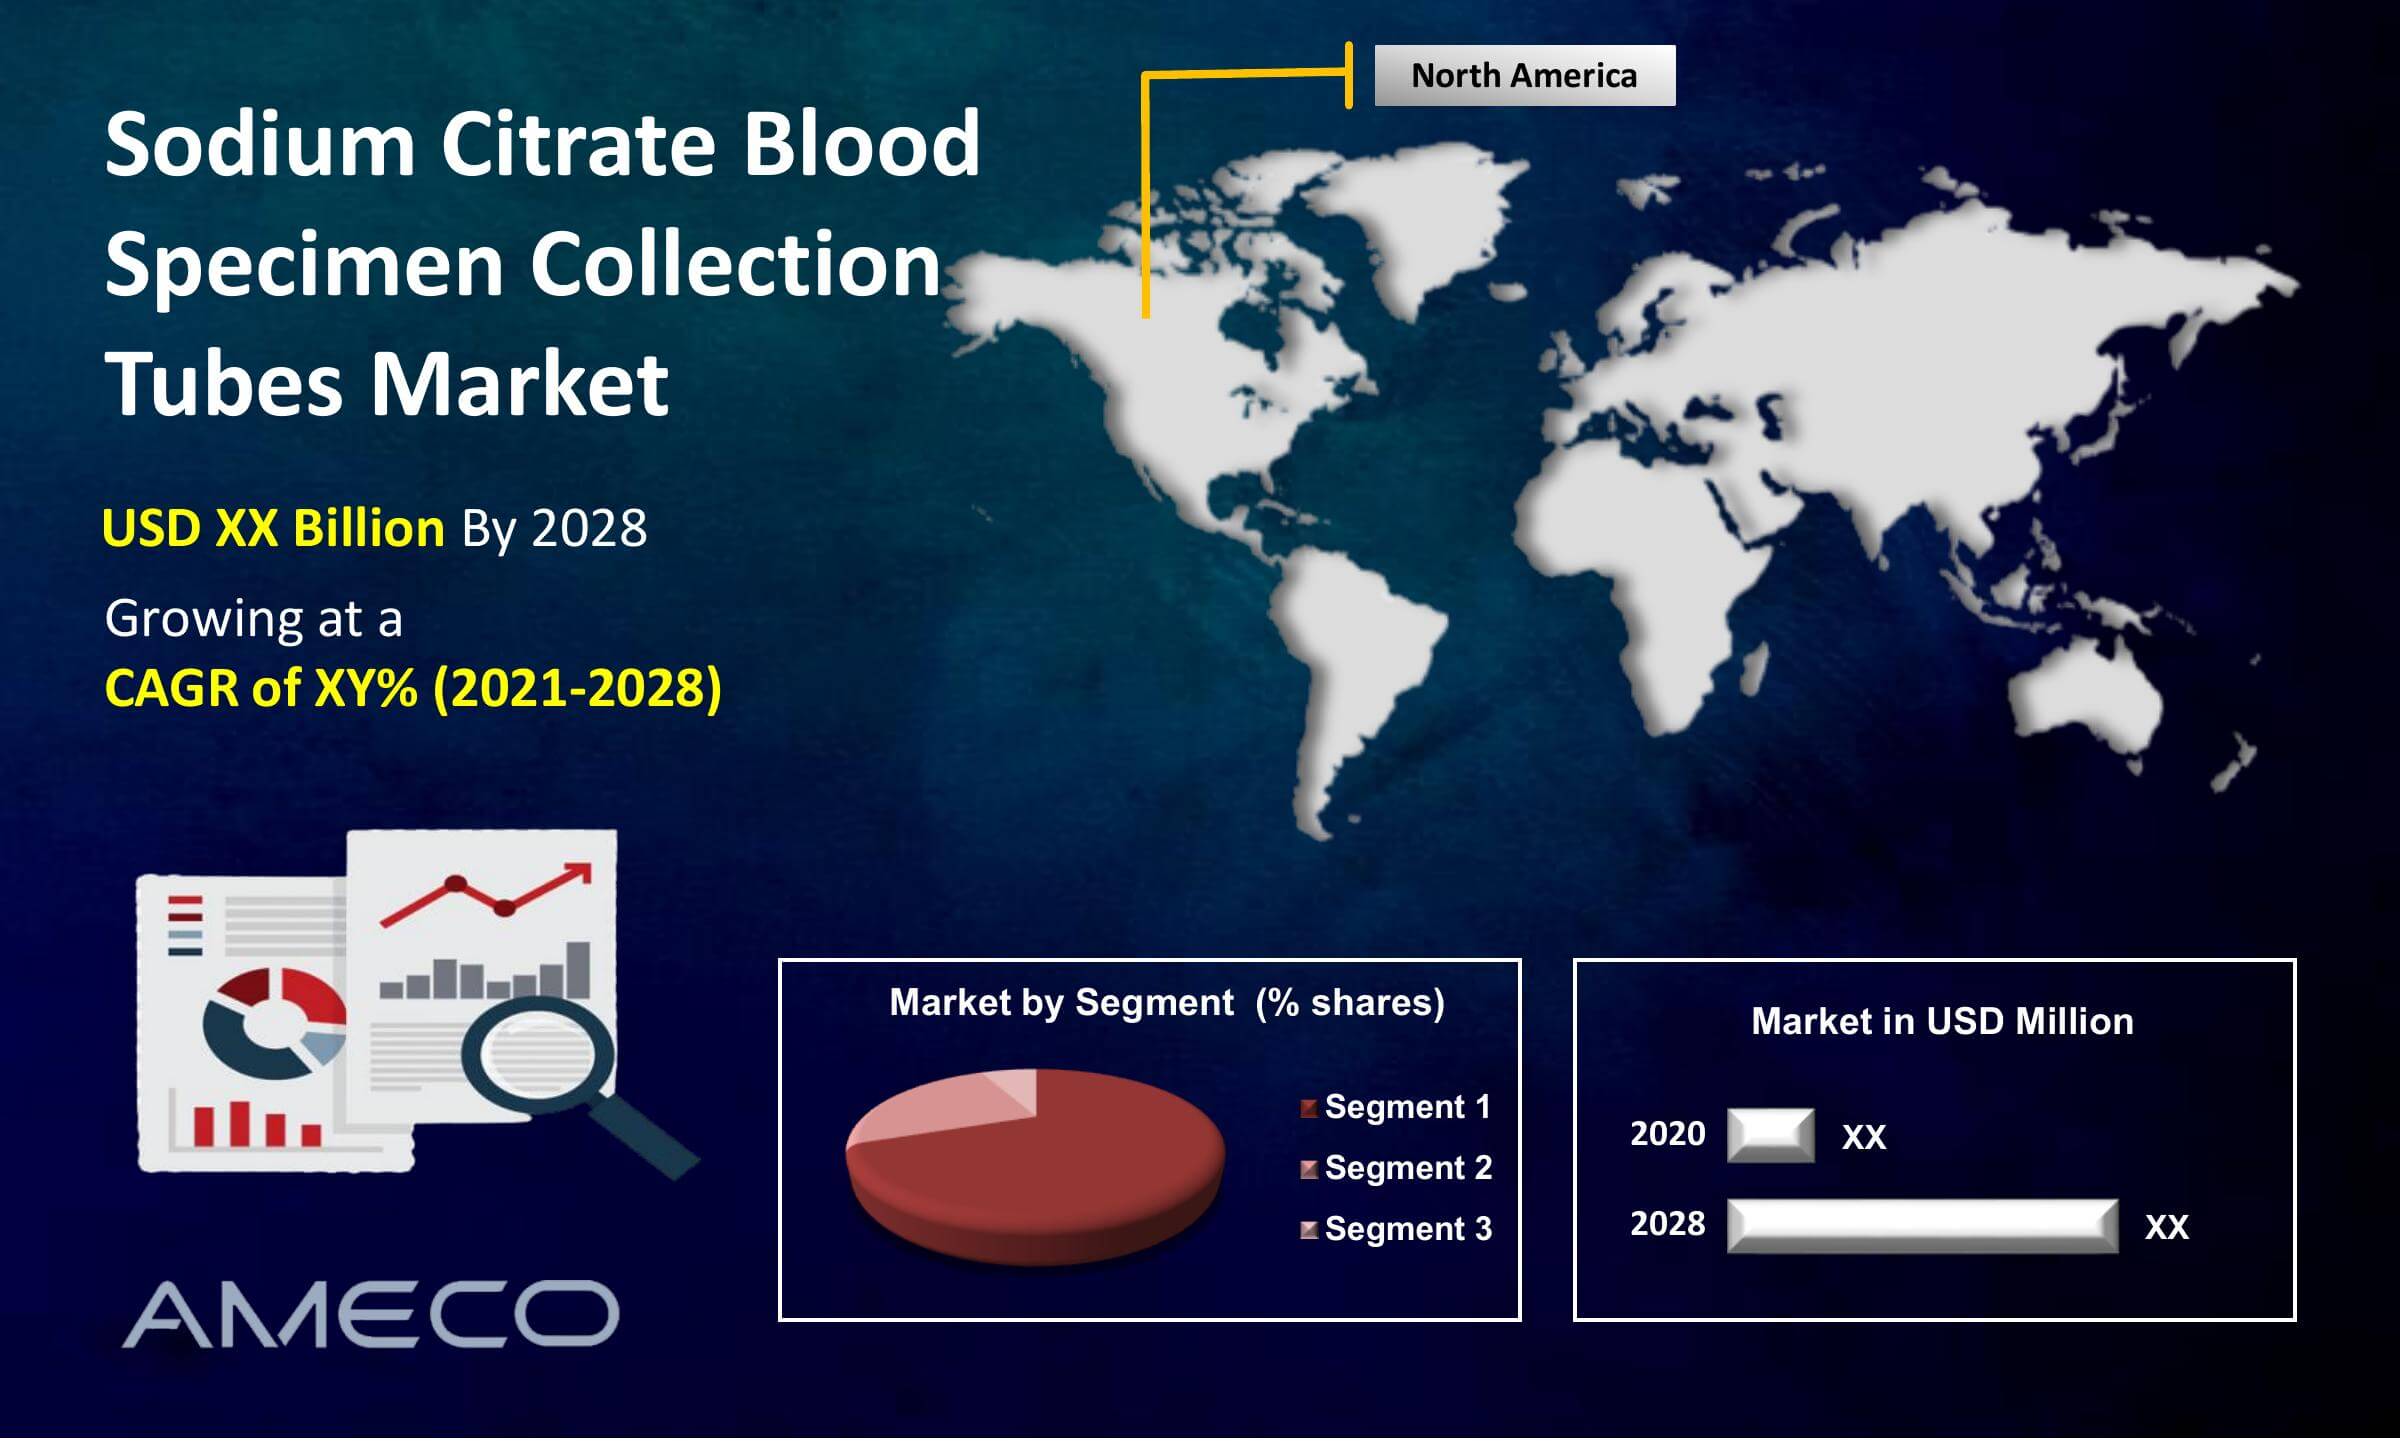 Sodium Citrate Blood Specimen Collection Tubes Market Analysis Period